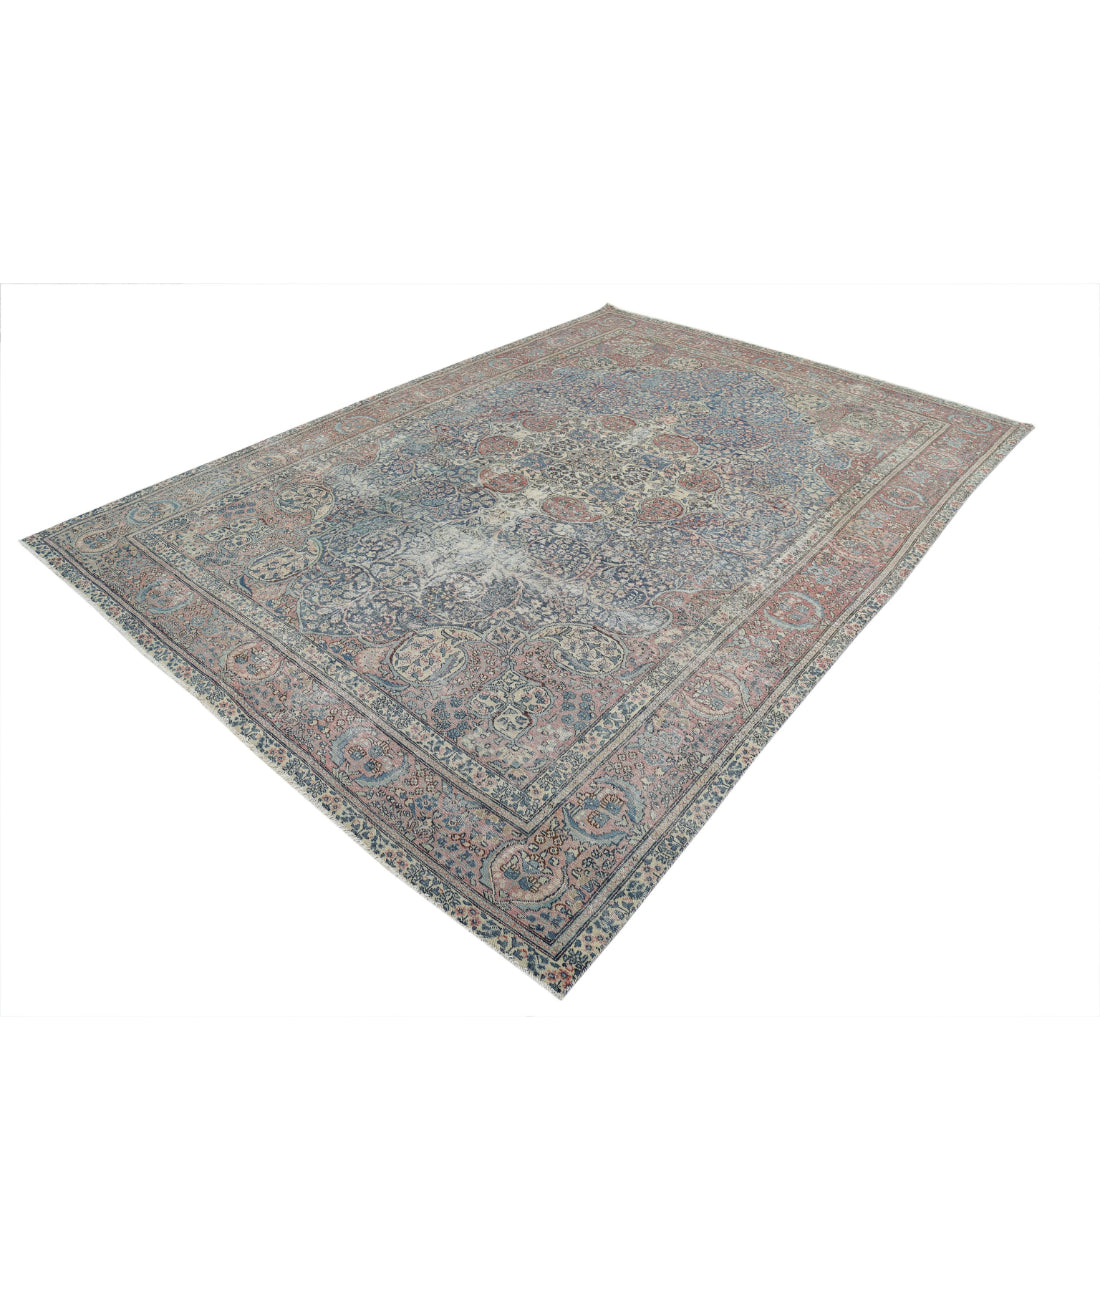 Hand Knotted Antique Persian Tabriz Wool Rug - 8'2'' x 11'2'' 8'2'' x 11'2'' (245 X 335) / Blue / Red